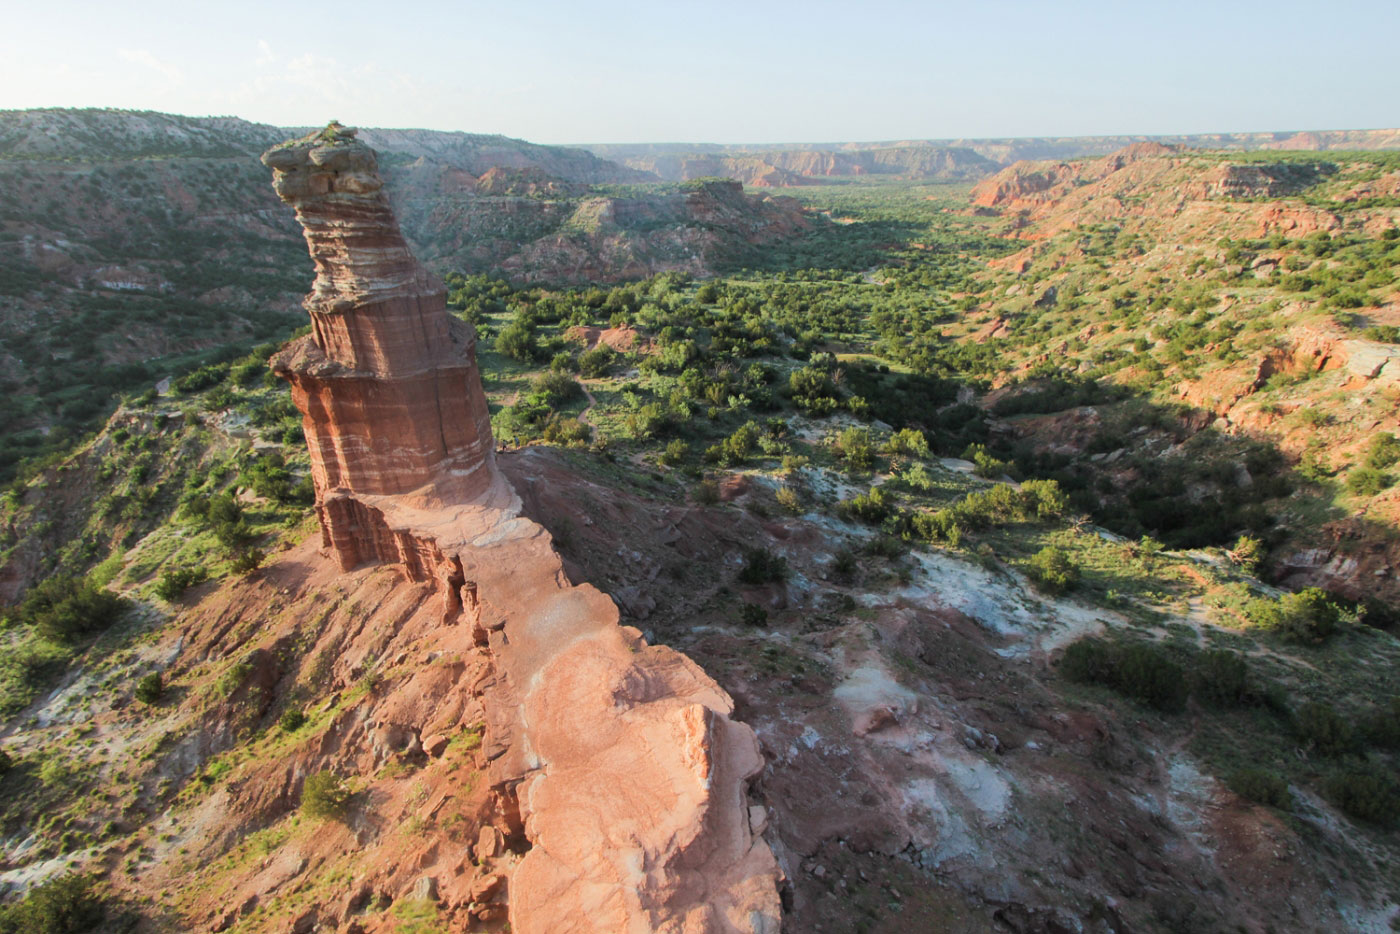 Hike The Lighthouse via Givens, Spicer, Lowry Loop in Palo Duro Canyon State Park, Texas - Stav is Lost